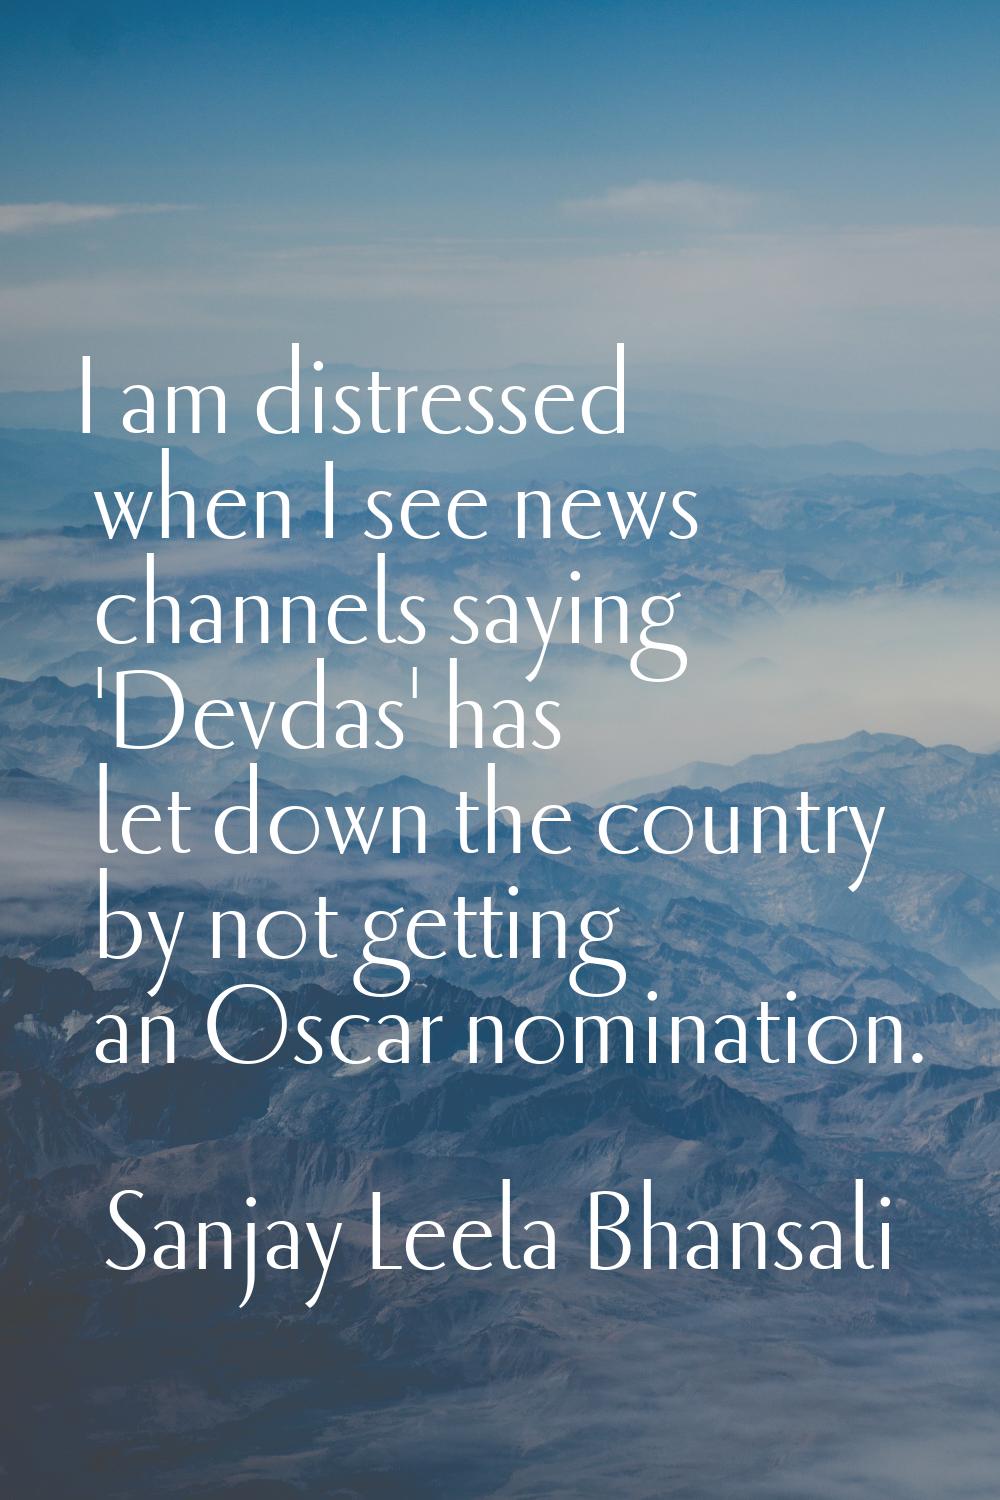 I am distressed when I see news channels saying 'Devdas' has let down the country by not getting an